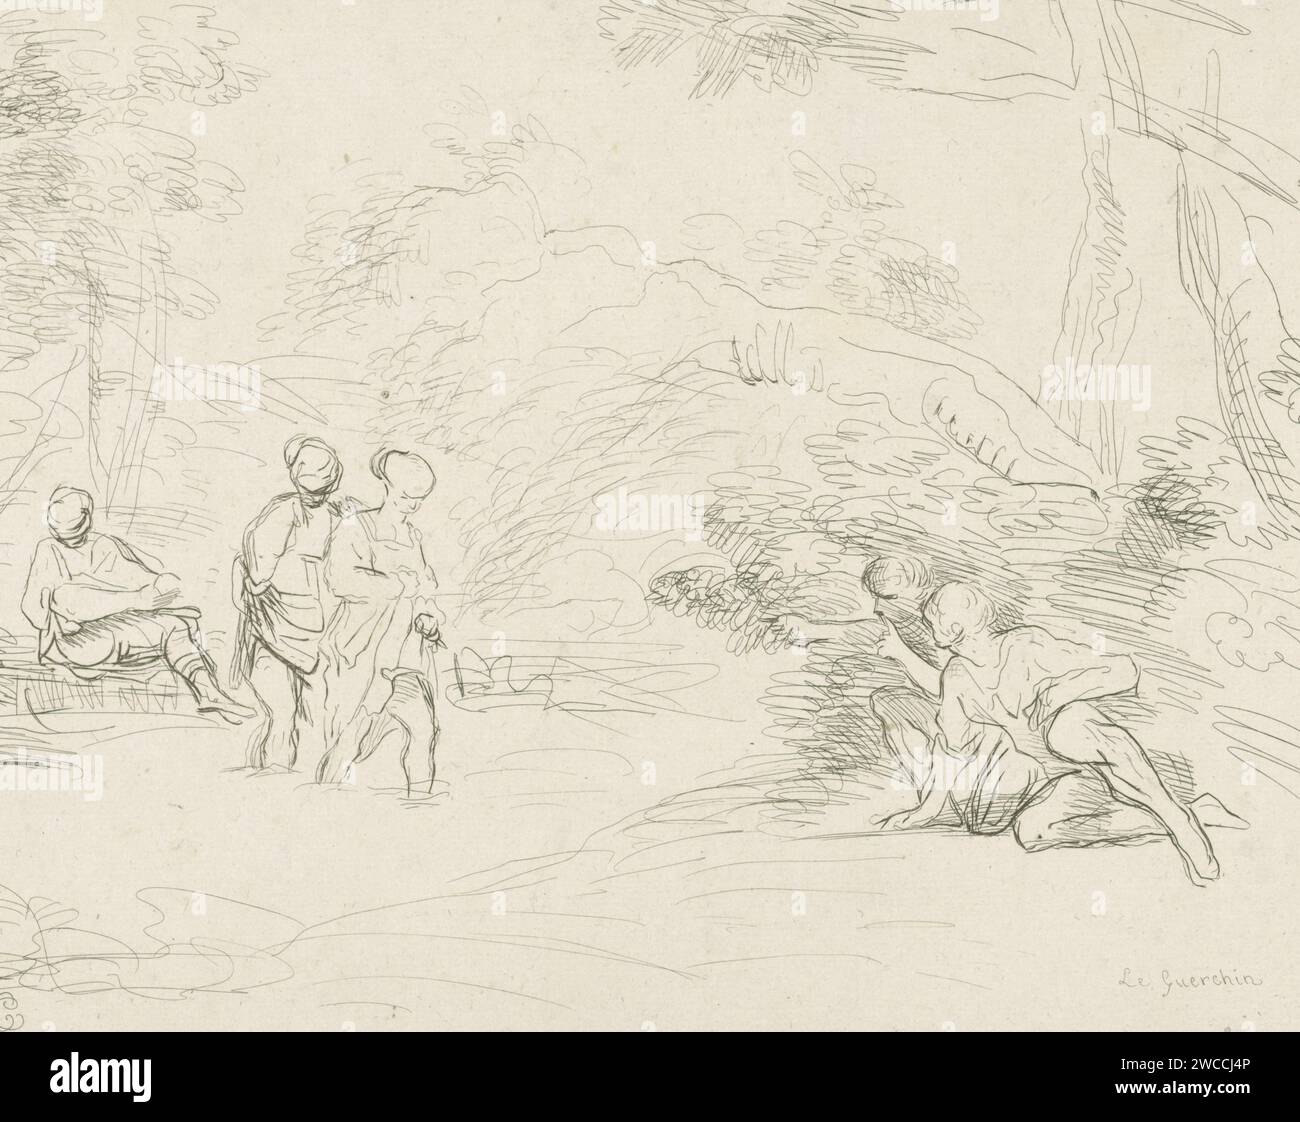 Bading Women by Men Spied, Charles de Ligne, After Guercino, 1774 - 1792 print Three bathing women are spied on by two men in the bushes.  paper etching washing and bathing. peeping, voyeur Stock Photo